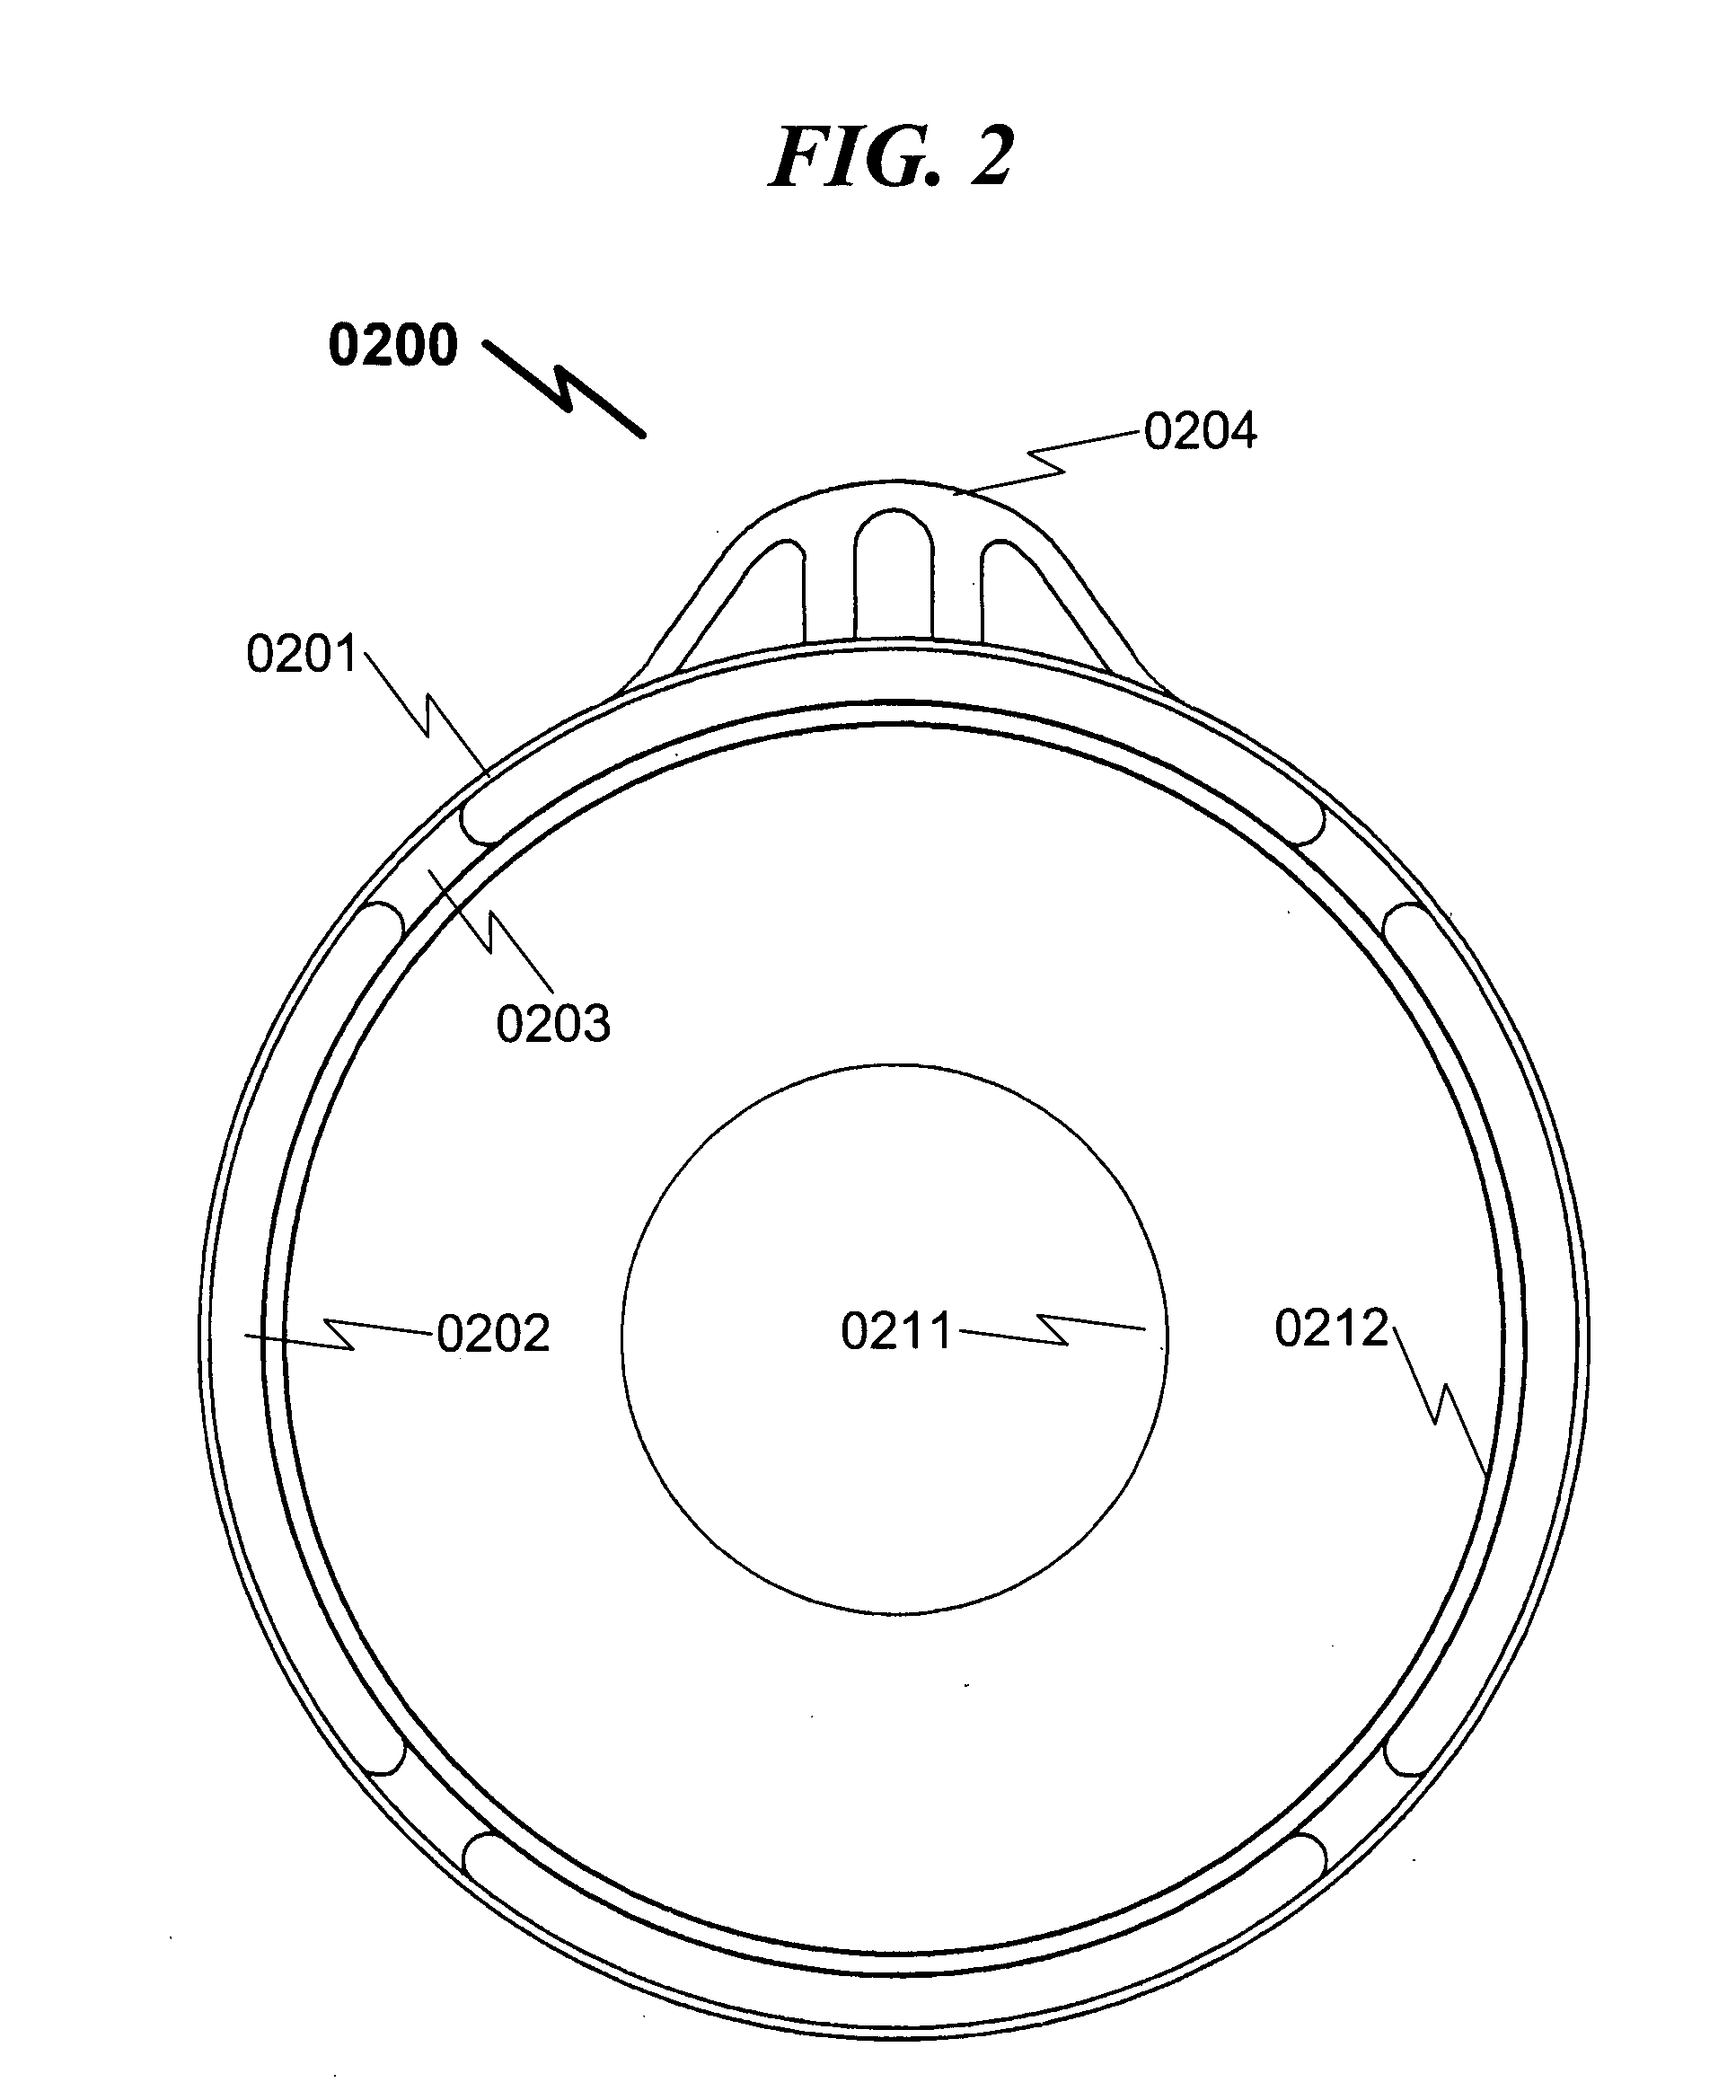 Light fixture cover system and method